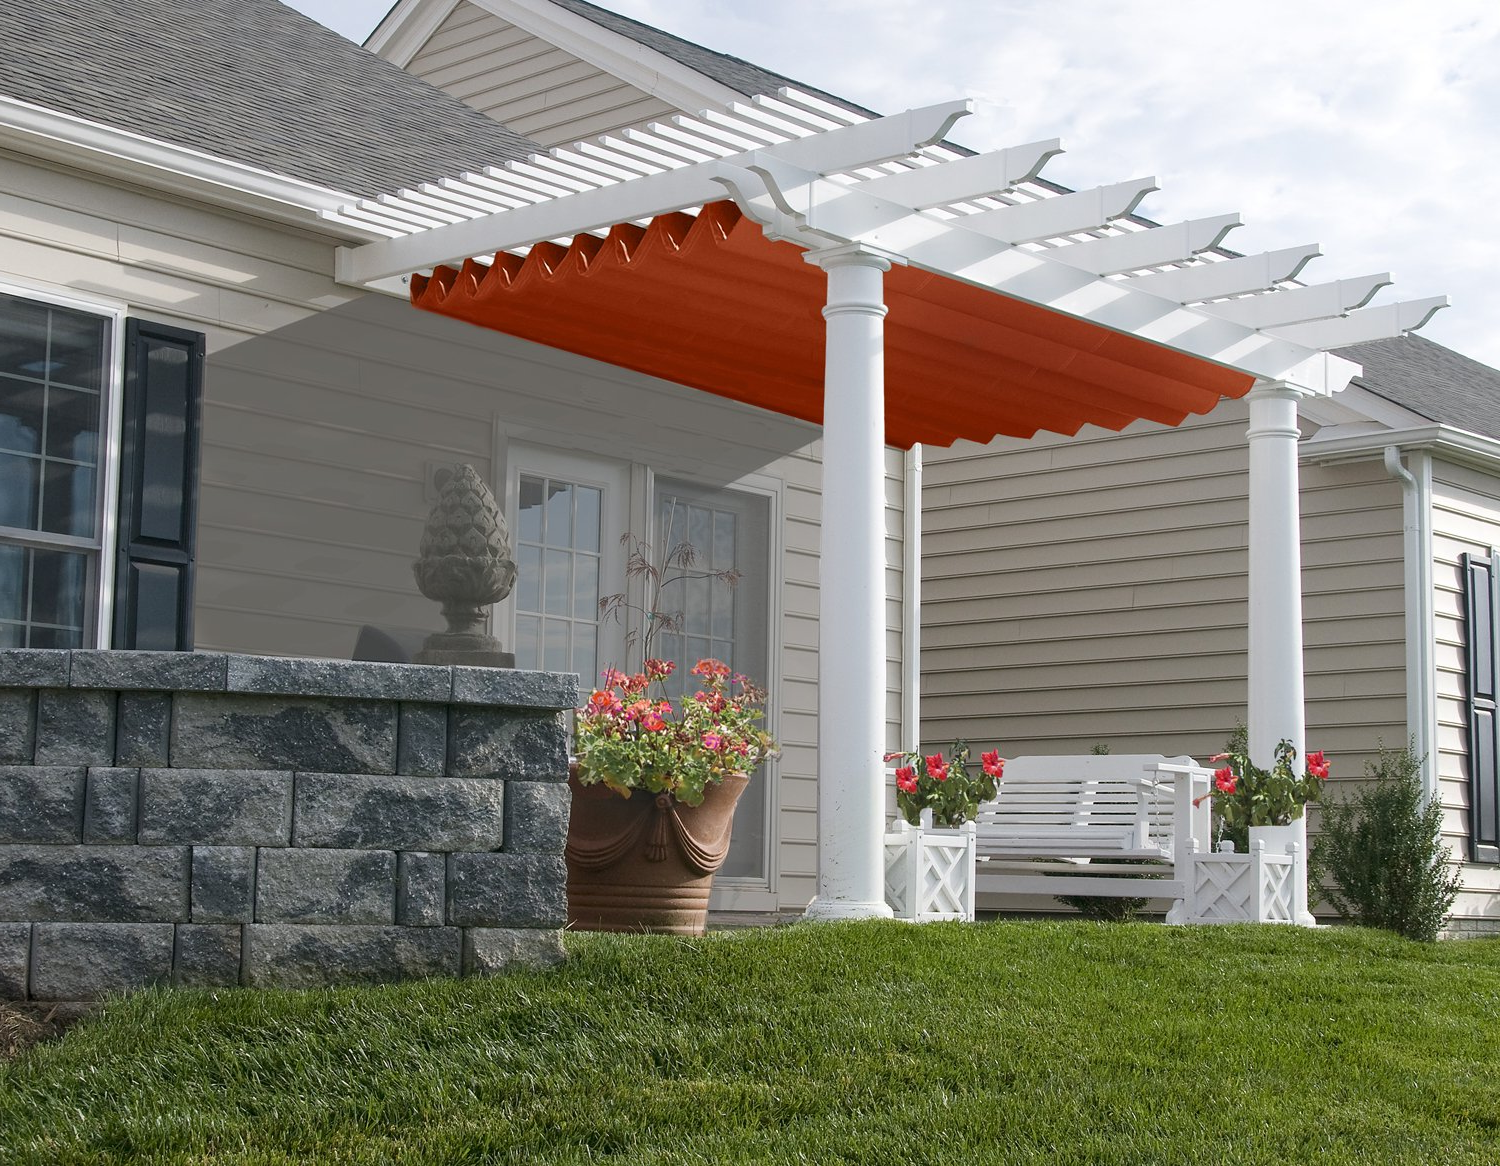 A white pergola with an orange awning over it